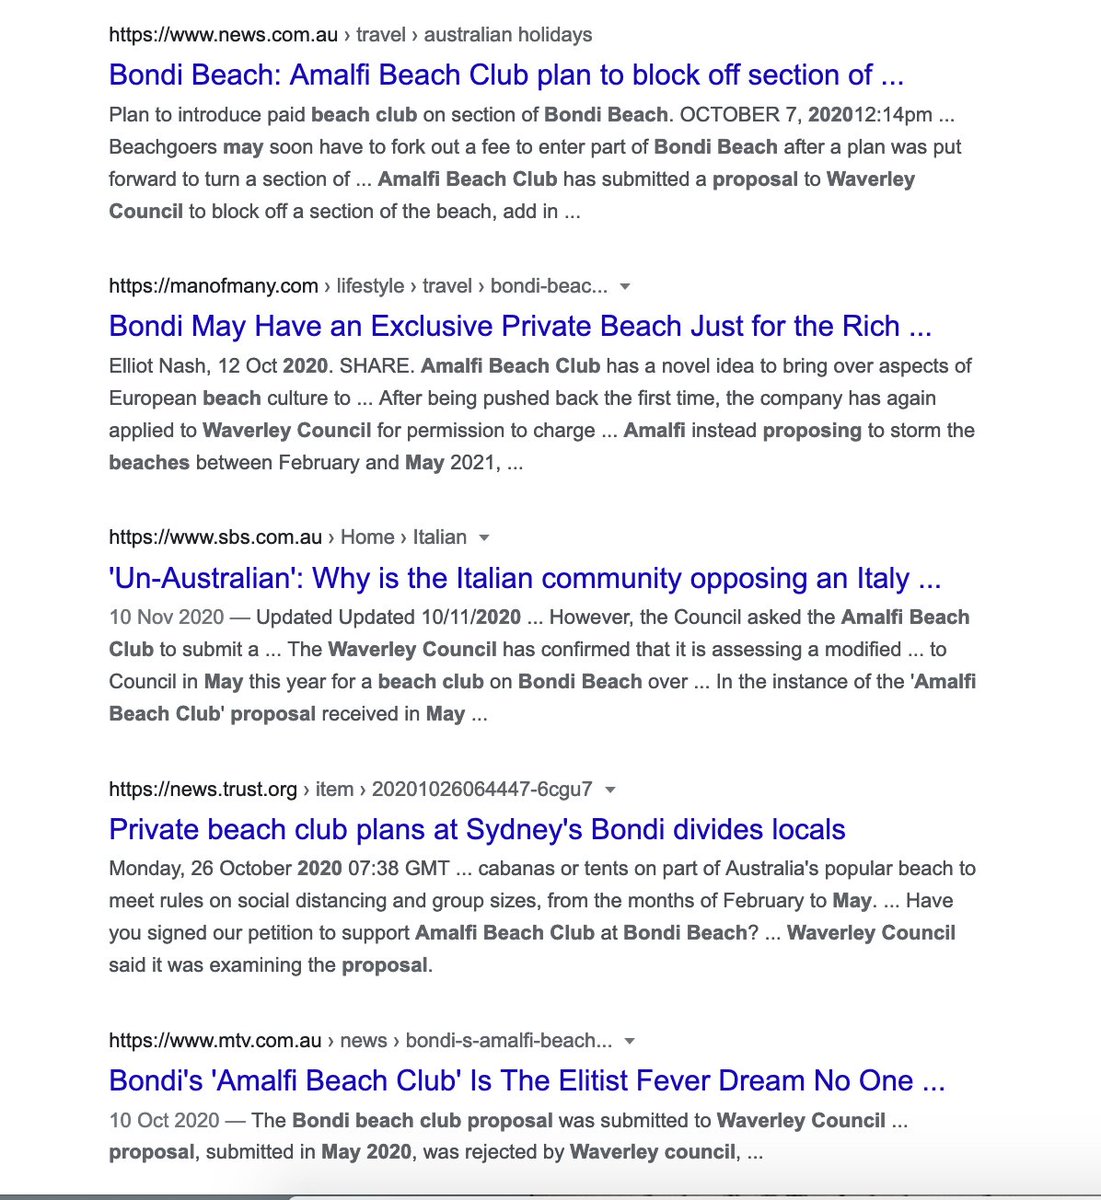 Lesson 2 - "Amalfi Beach Club" orHow To Get Brand Recognition & Attention When You Don't Have Any. In October last year, stories began circulating about a business placing a private beach club on Bondi Beach. It received massive coverage. And massive outrage.